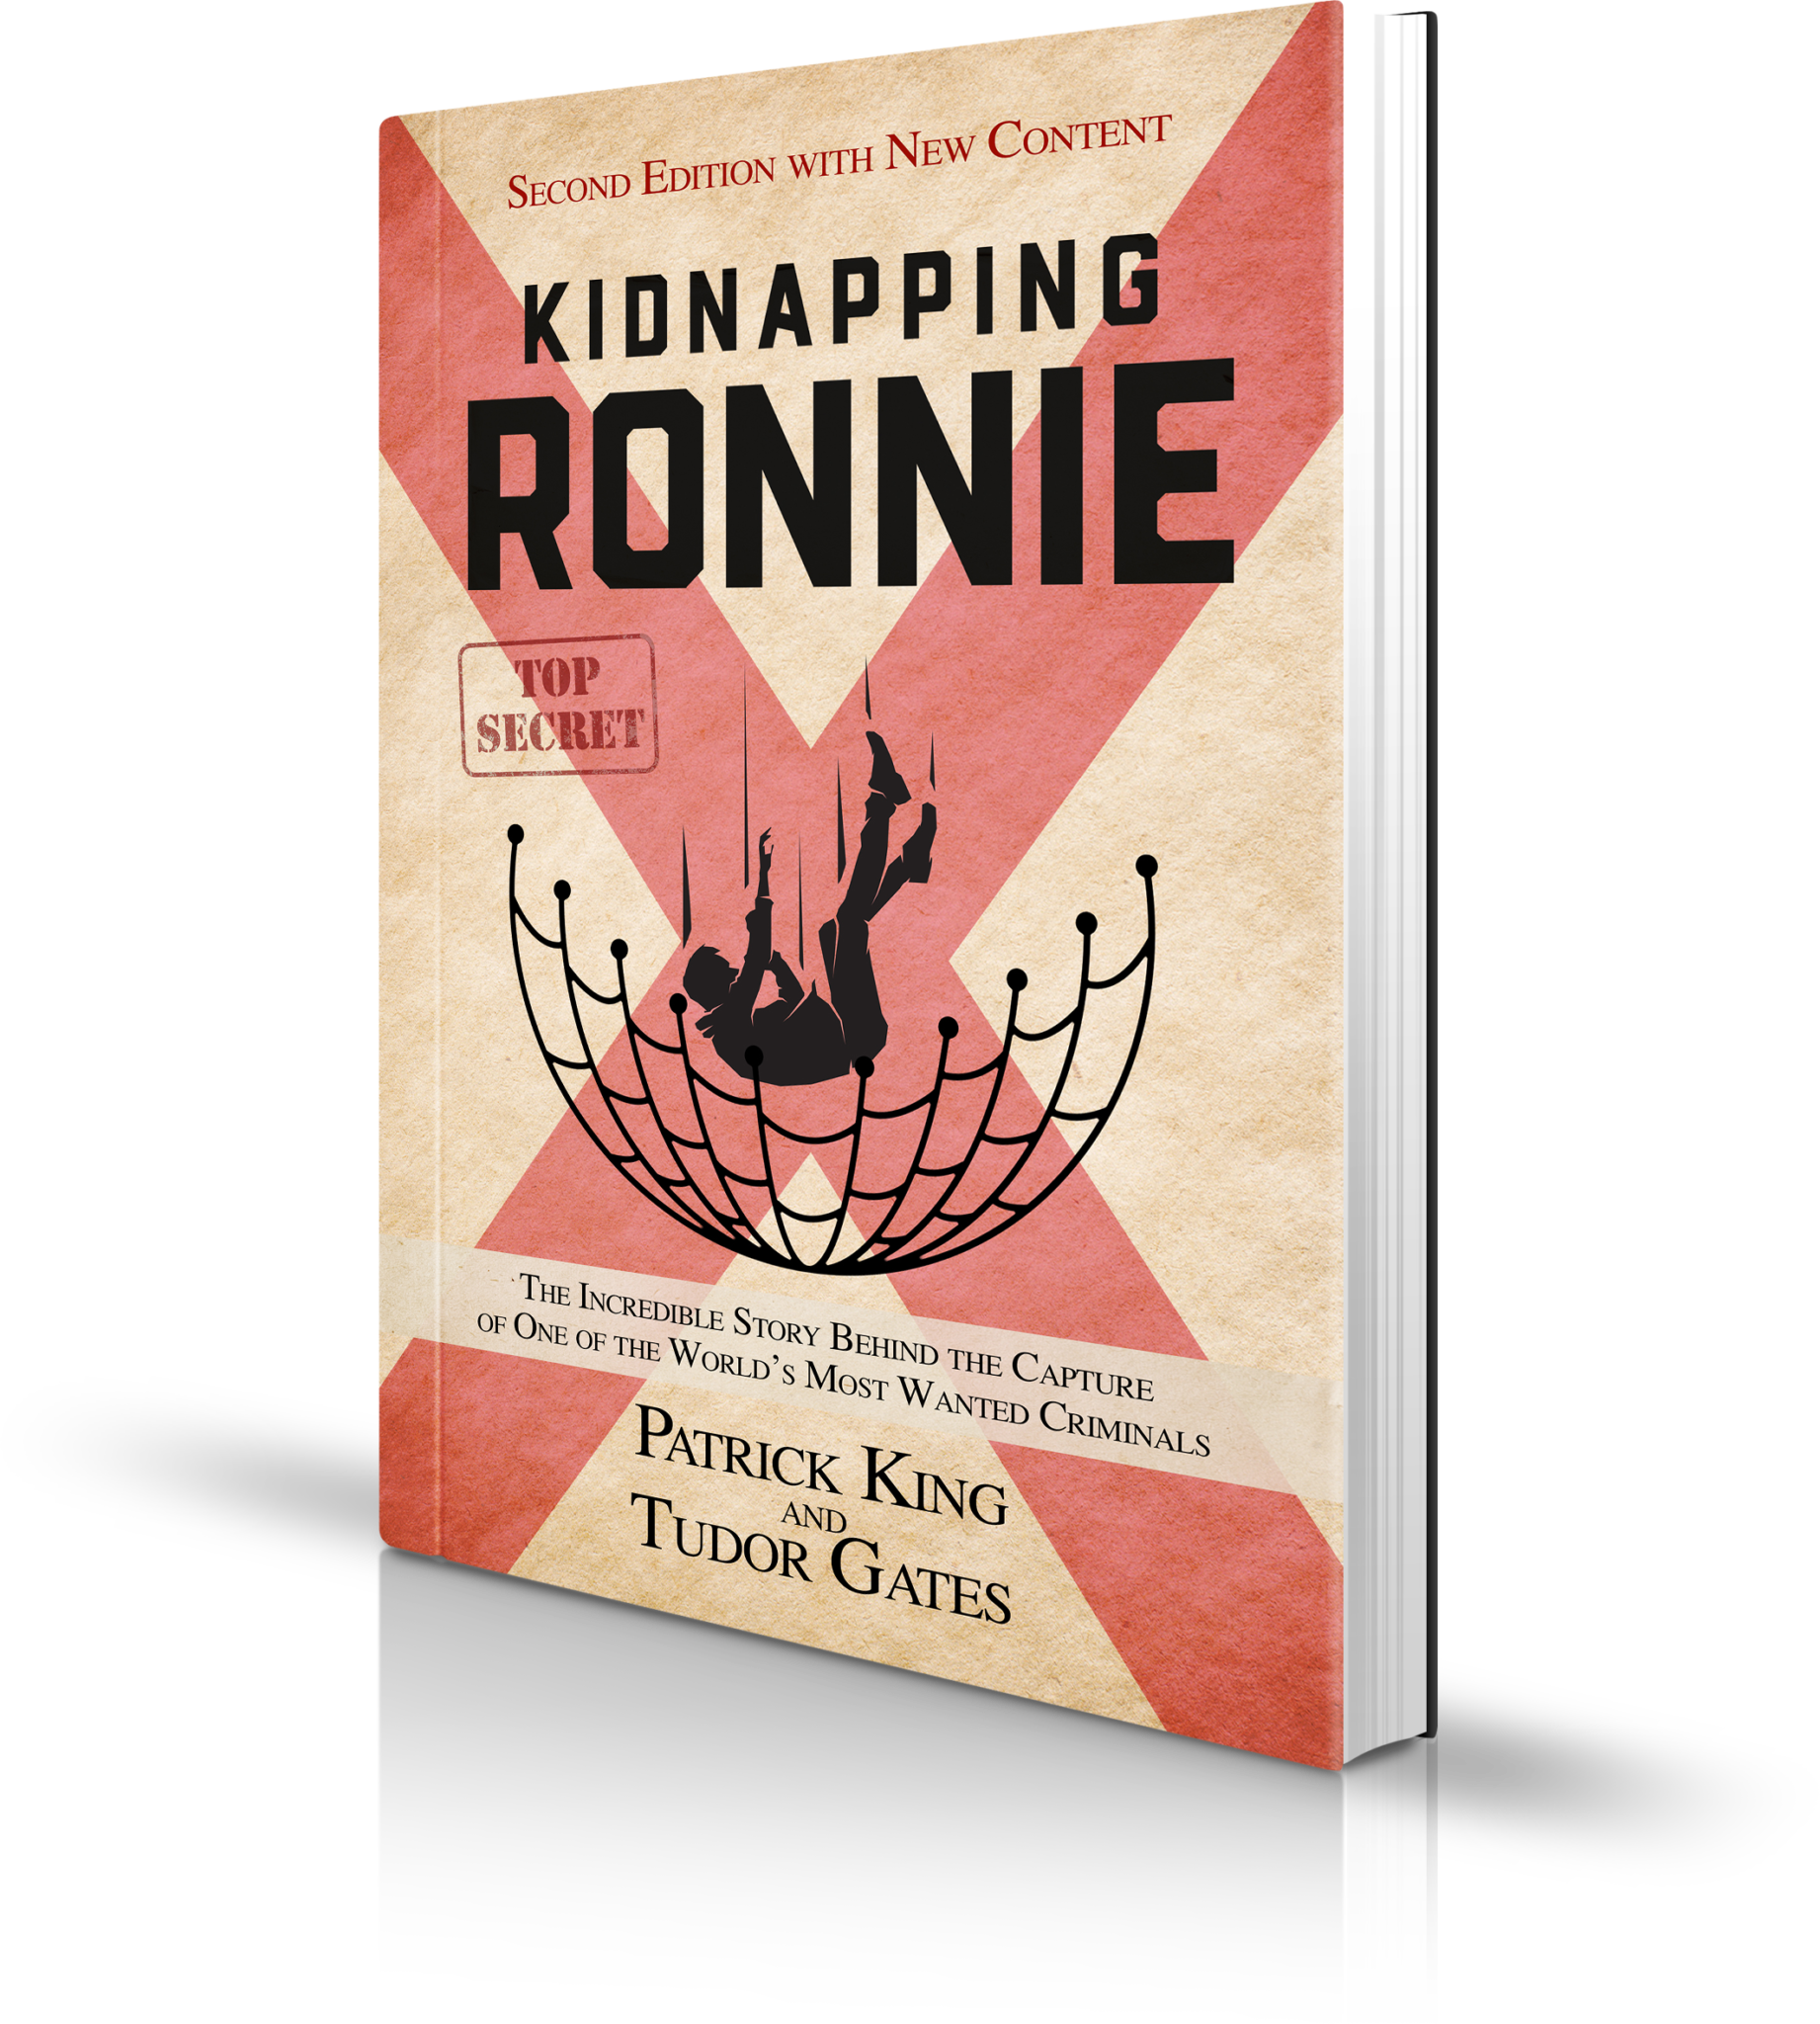 Kidnapping Ronnie by Author Patrick King- Out Soon